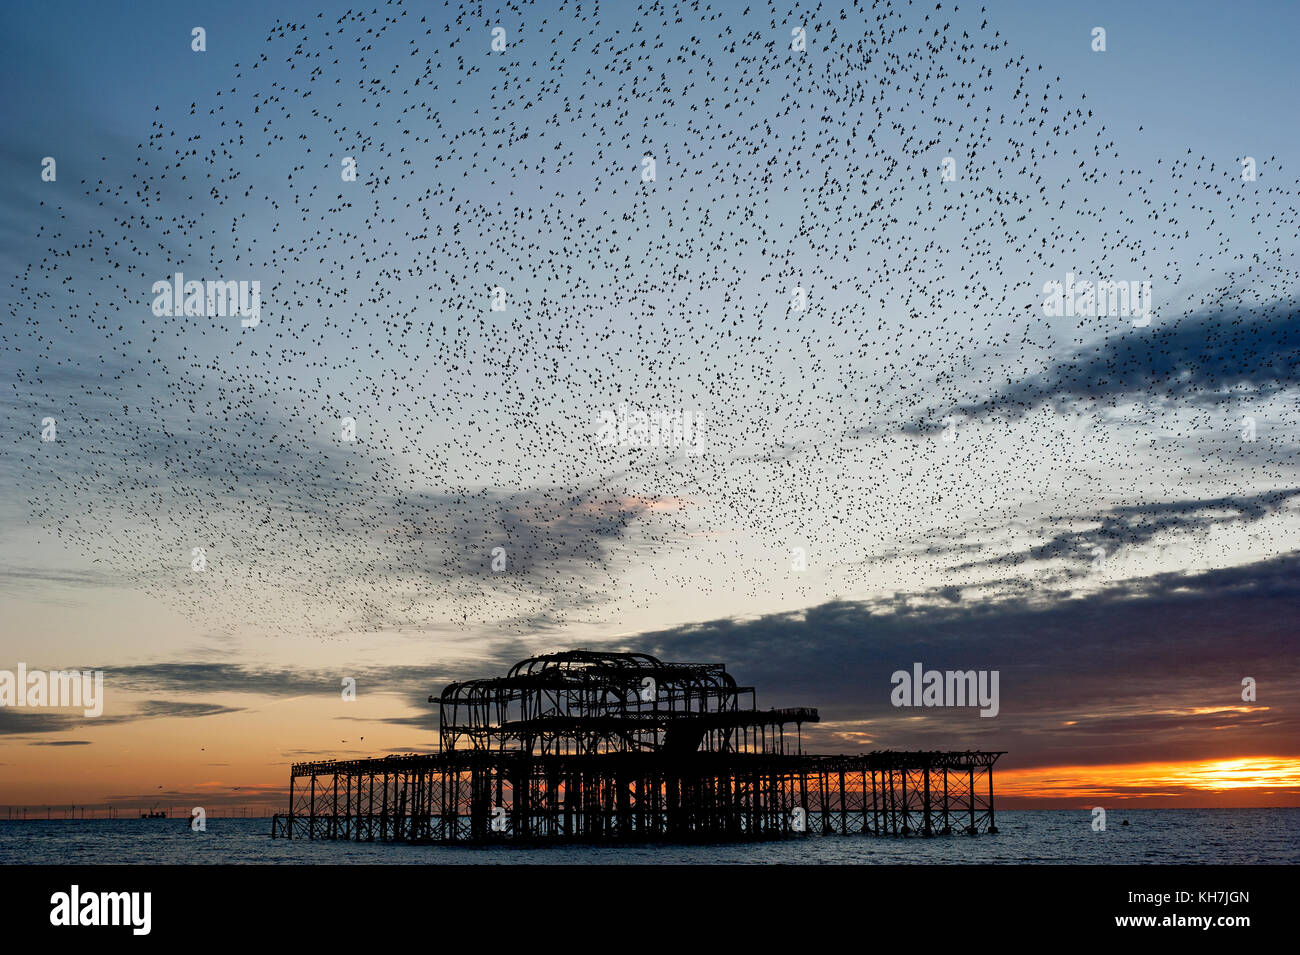 Murmuration over the ruins of Brighton's West Pier on the south coast of England. A flock of starlings swoops in a unified mass over the pier at sunset. Stock Photo